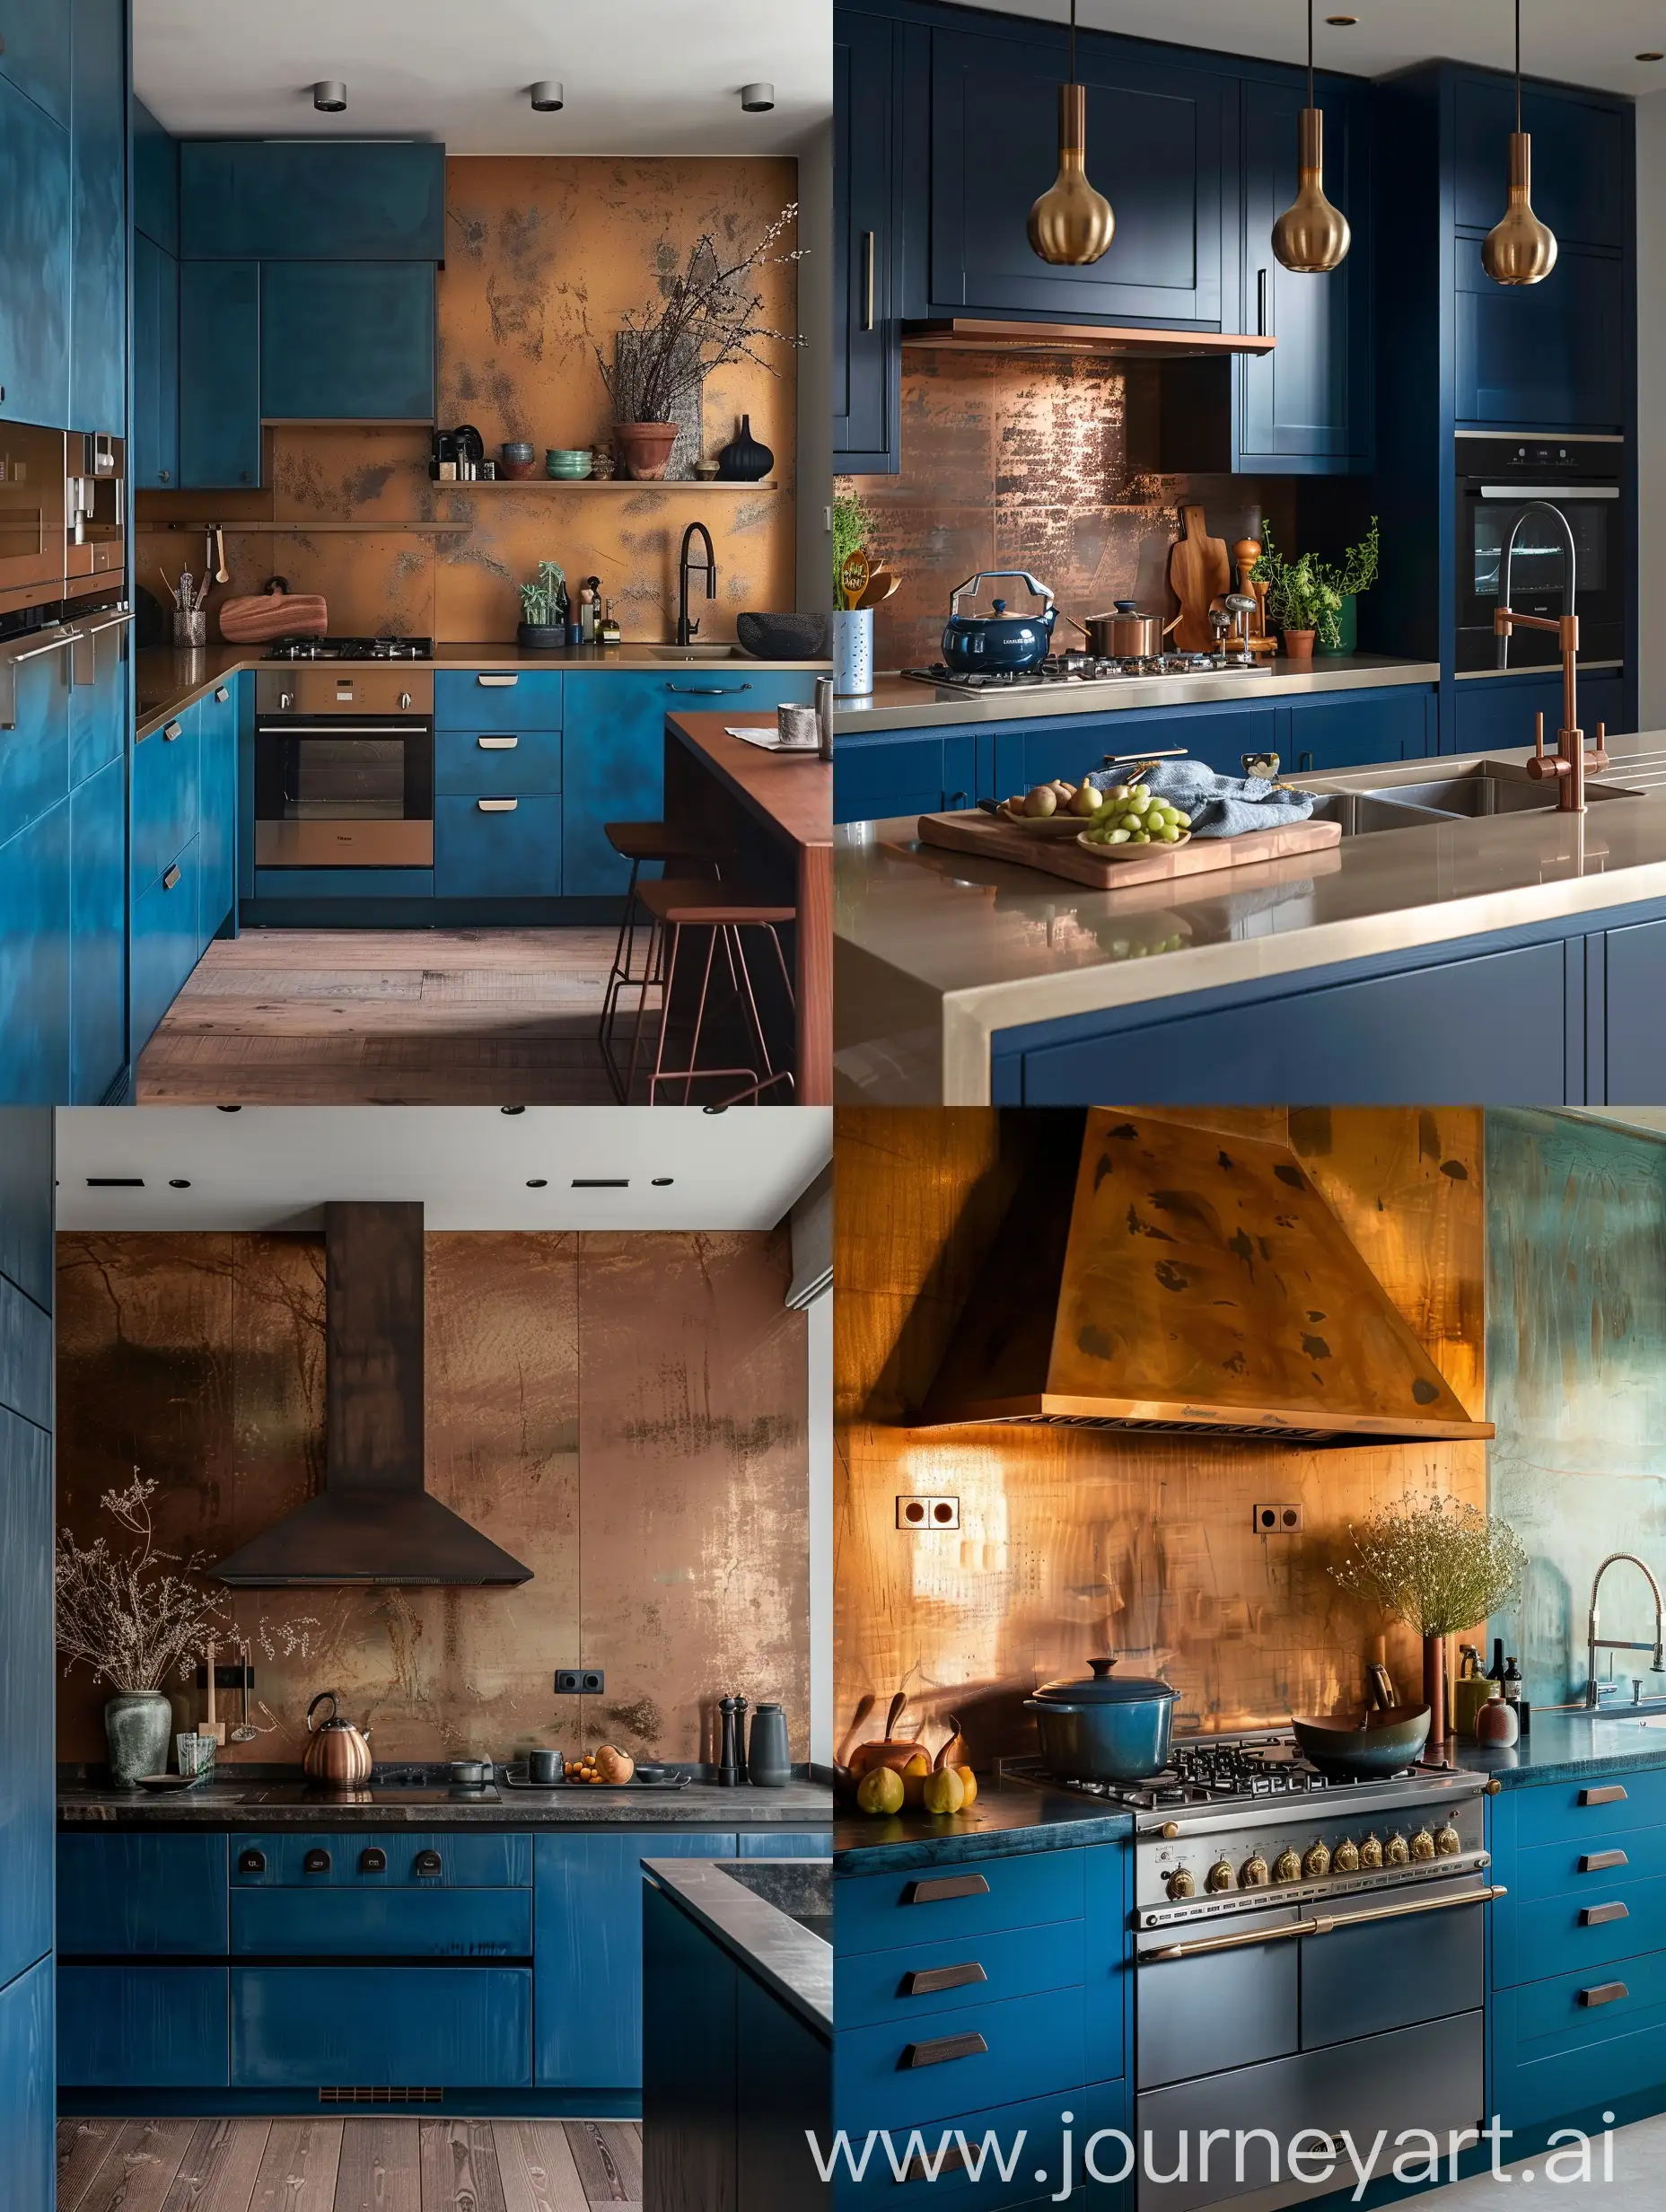 kitchen in petrol blue and bronze color scheme